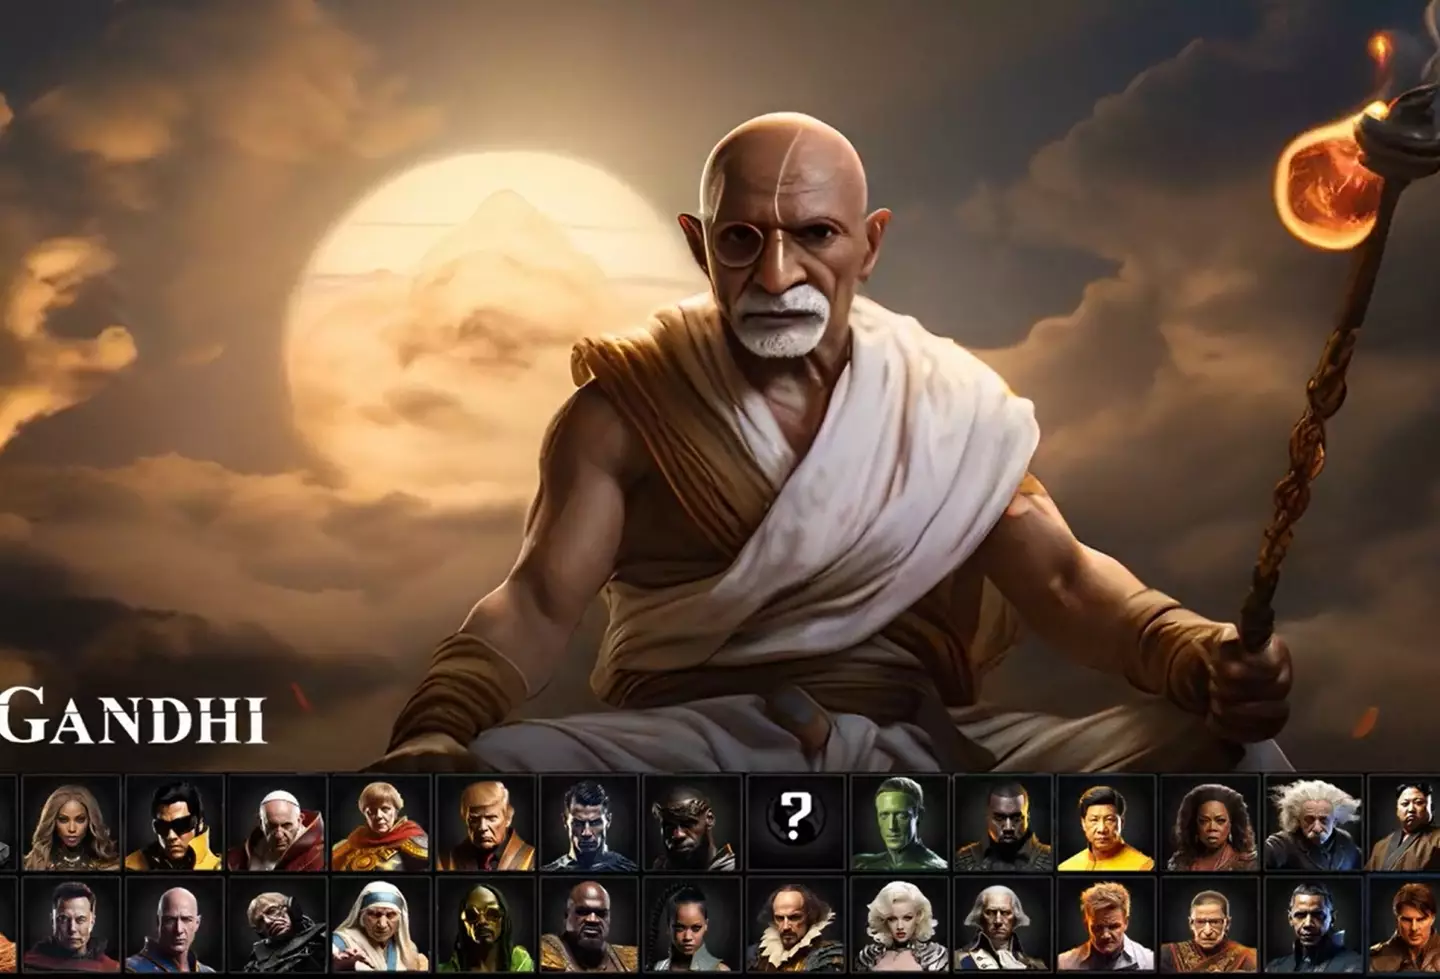 While Gandhi was famously a man of peace any Civilization player will tell you video game Gandhi is a nuclear-bomb dropping monster.